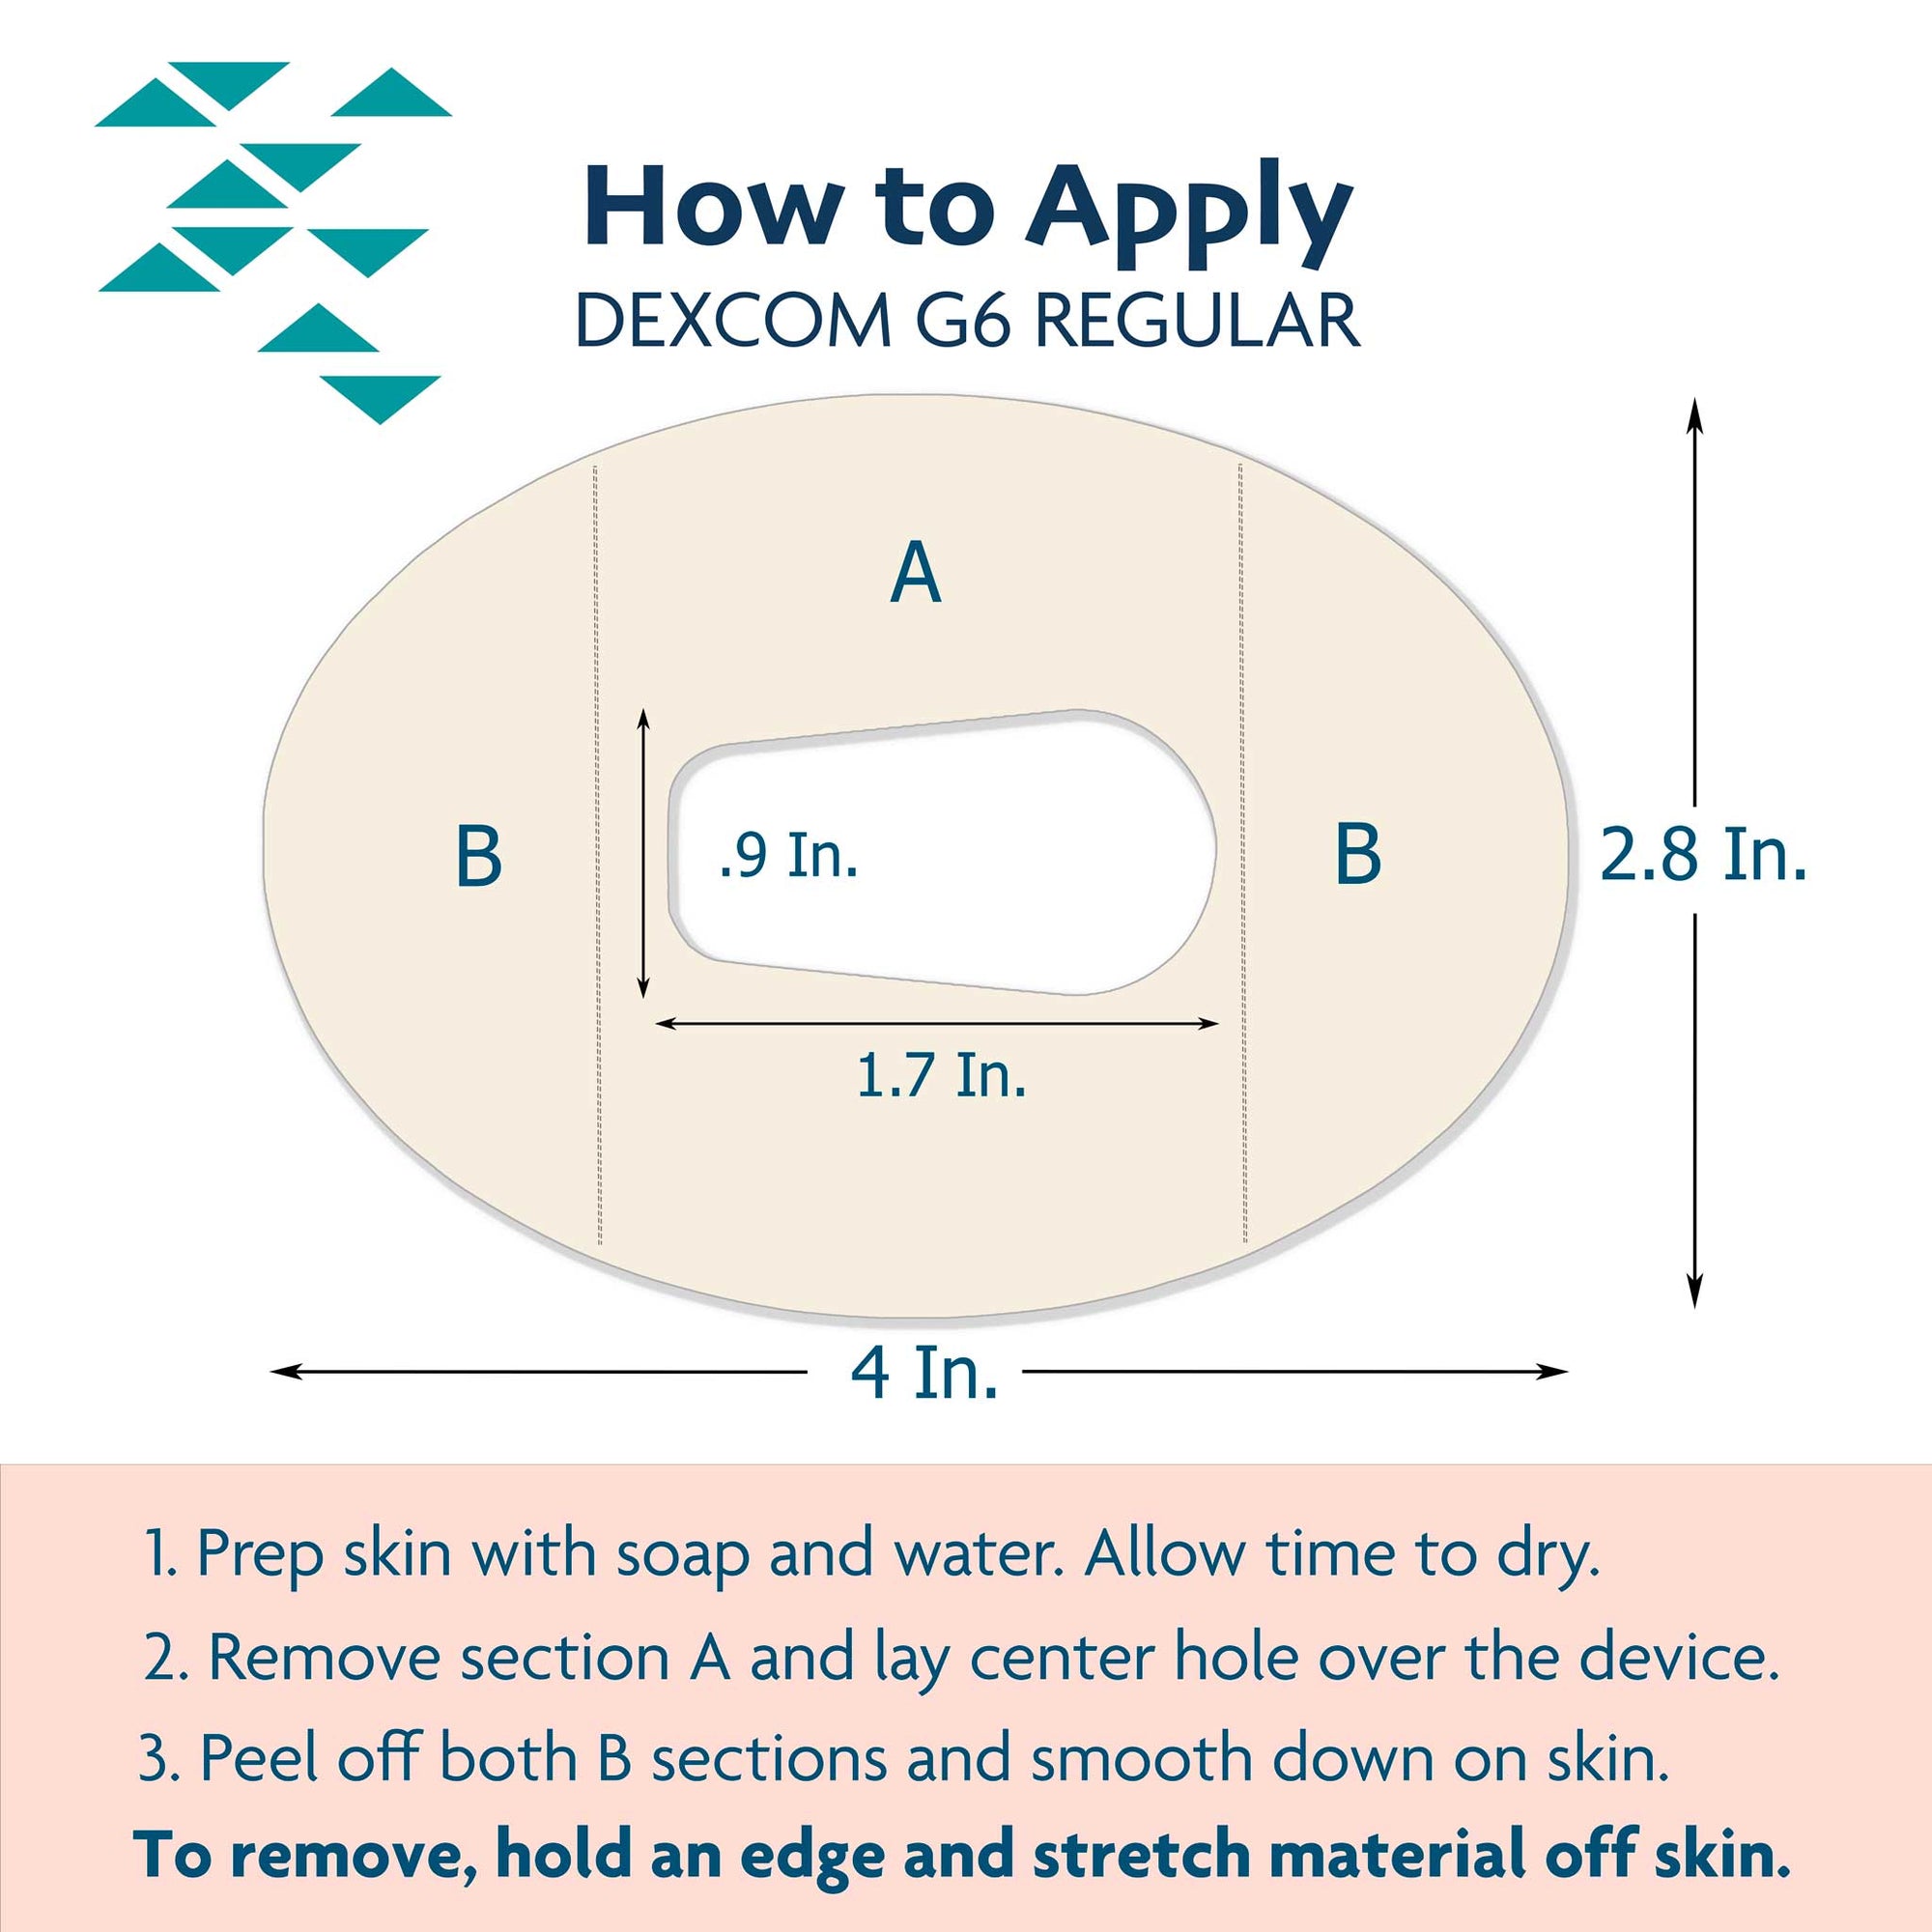 Dexcom G6 ADhesive Tape Application Tape and Dimensions